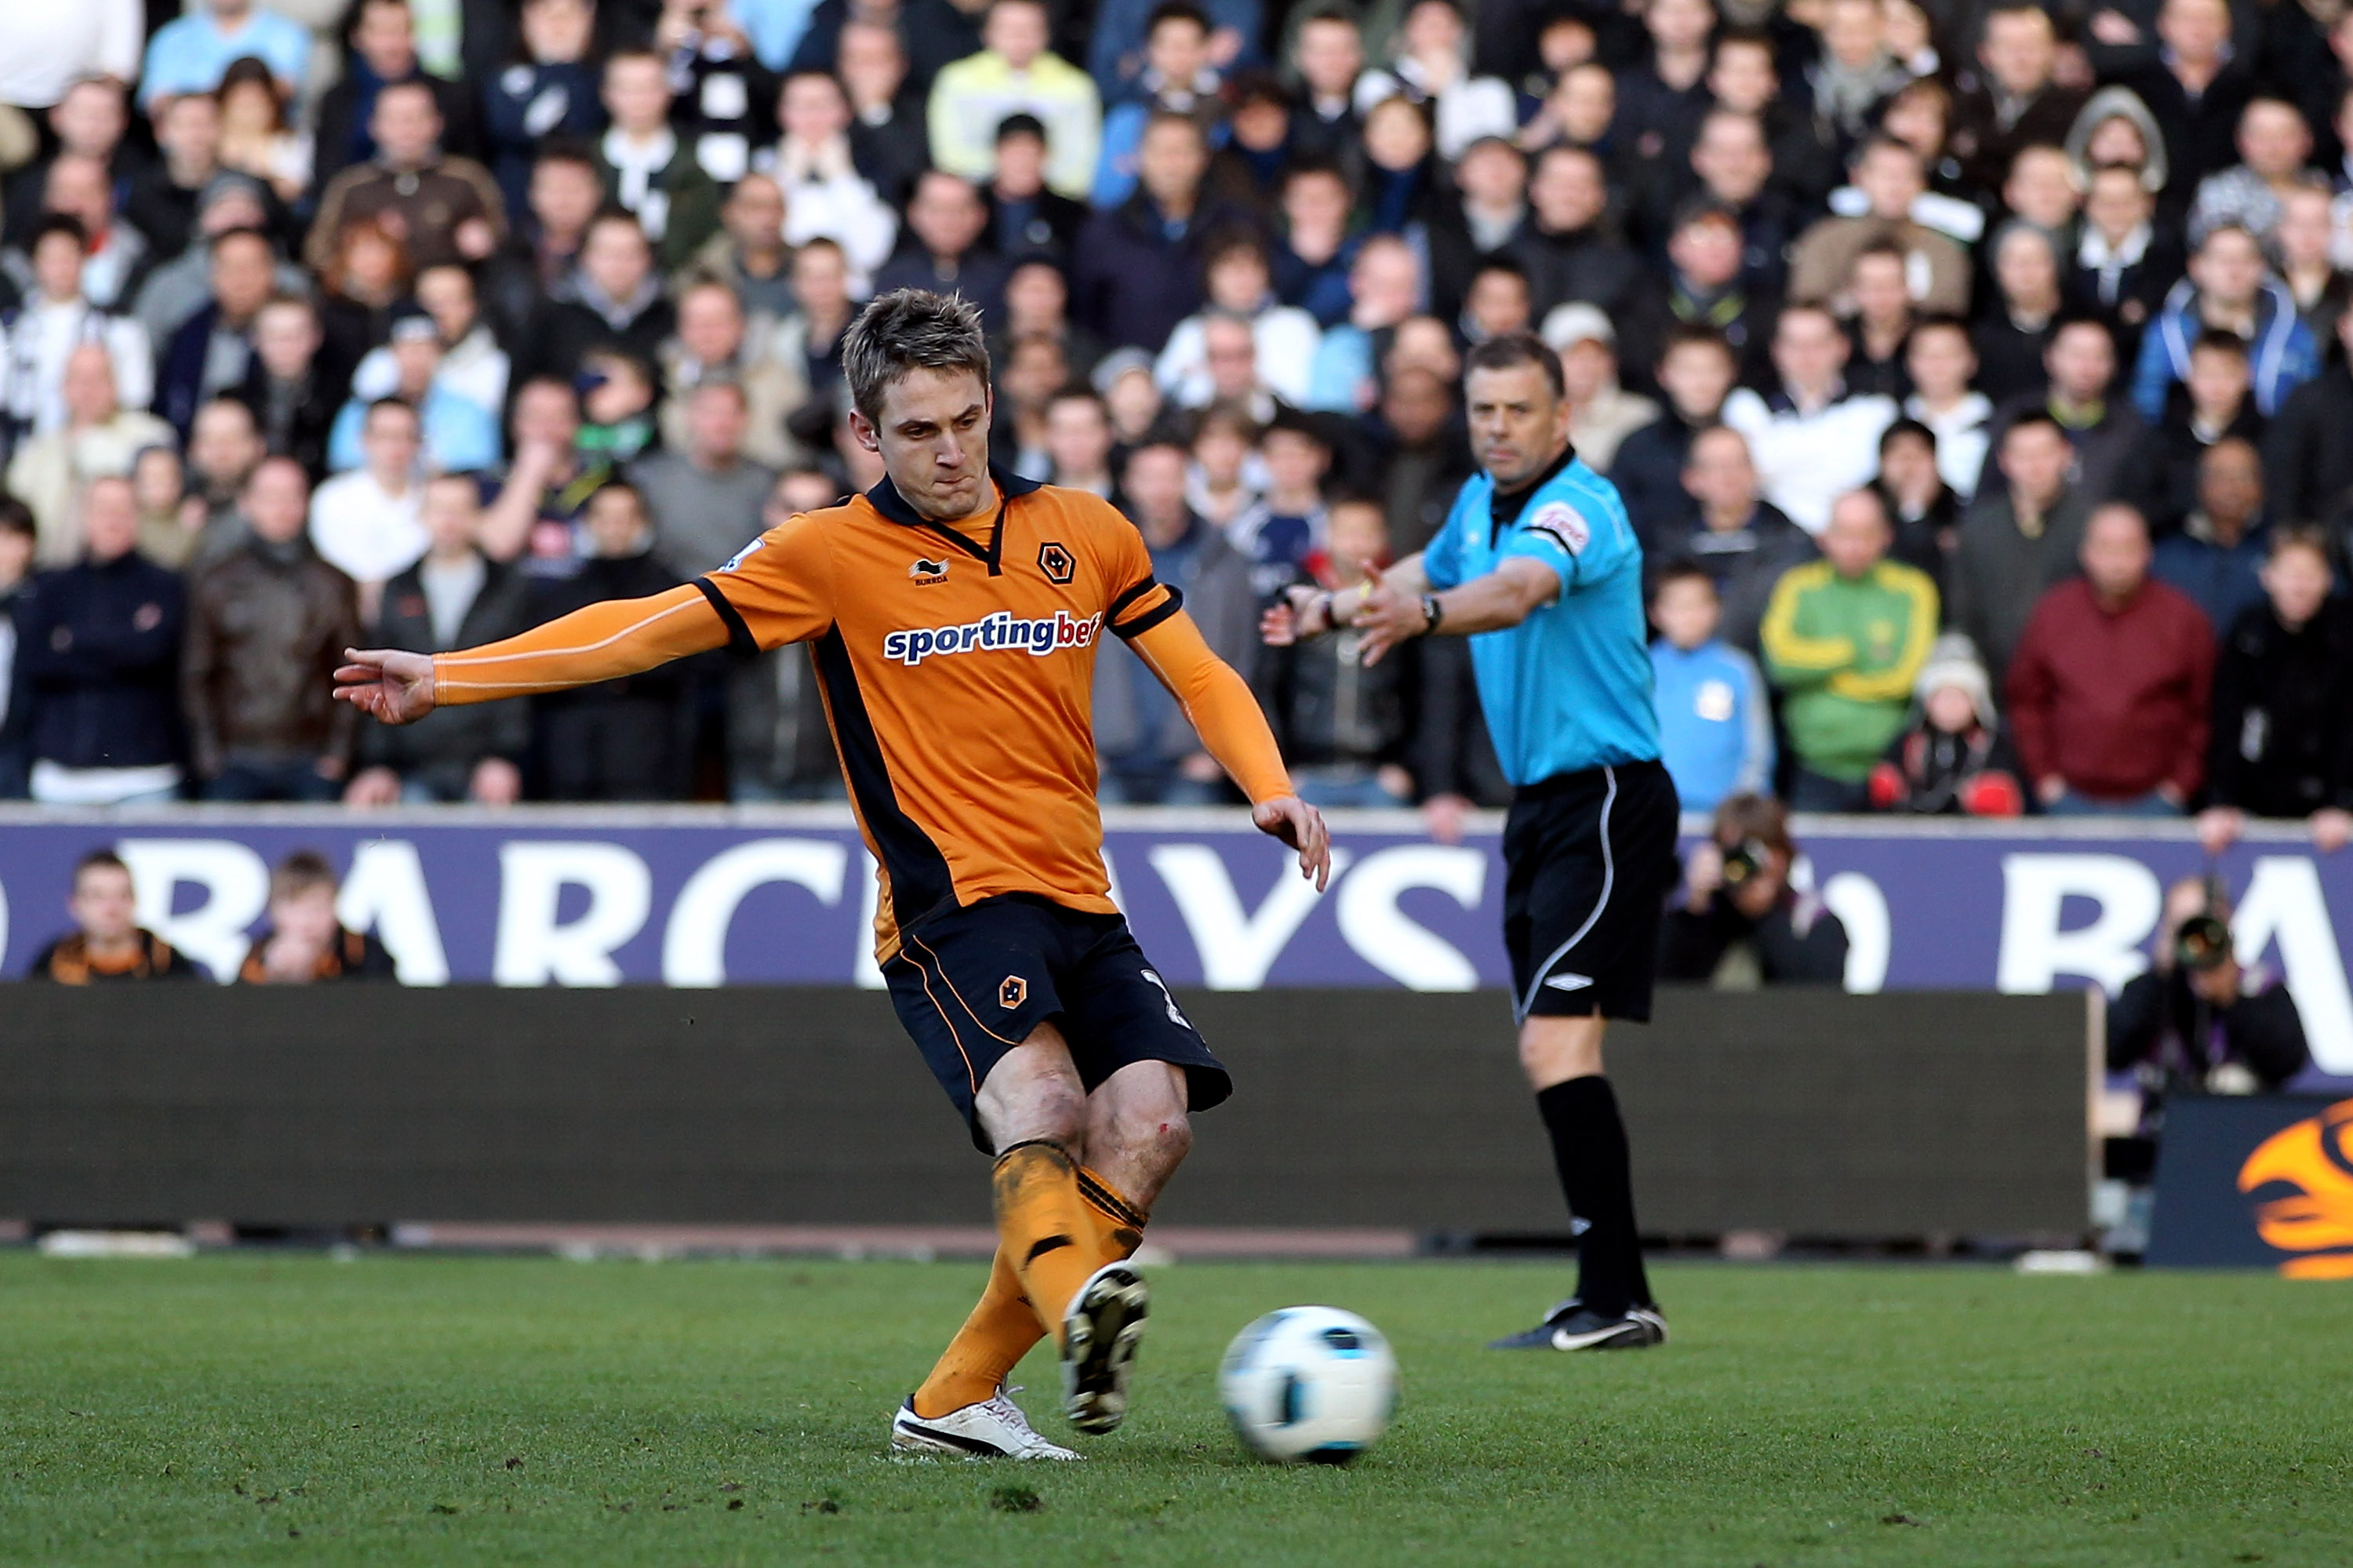 WOLVERHAMPTON, ENGLAND - MARCH 06:  Kevin Doyle of Wolves scores his second from the penalty spot during the Barclays Premier League match between Wolverhampton Wanderers and Tottenham Hotspur at Molineux on March 6, 2011 in Wolverhampton, England.  (Phot